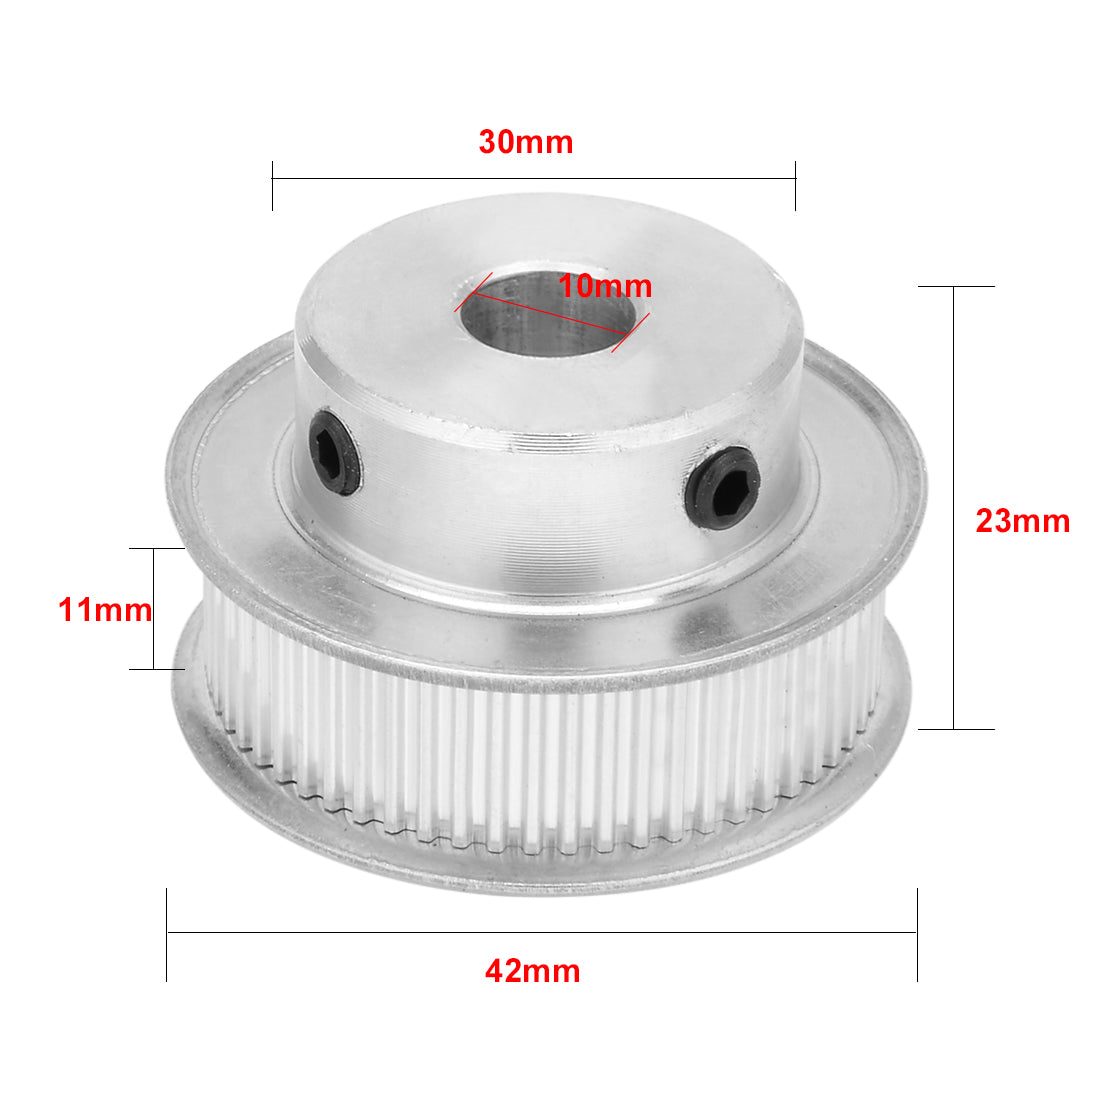 uxcell Uxcell Aluminum M-X-L 60 Teeth 10mm Bore Timing Belt Idler Pulley Synchronous Wheel 10mm Belt for 3D Printer CNC